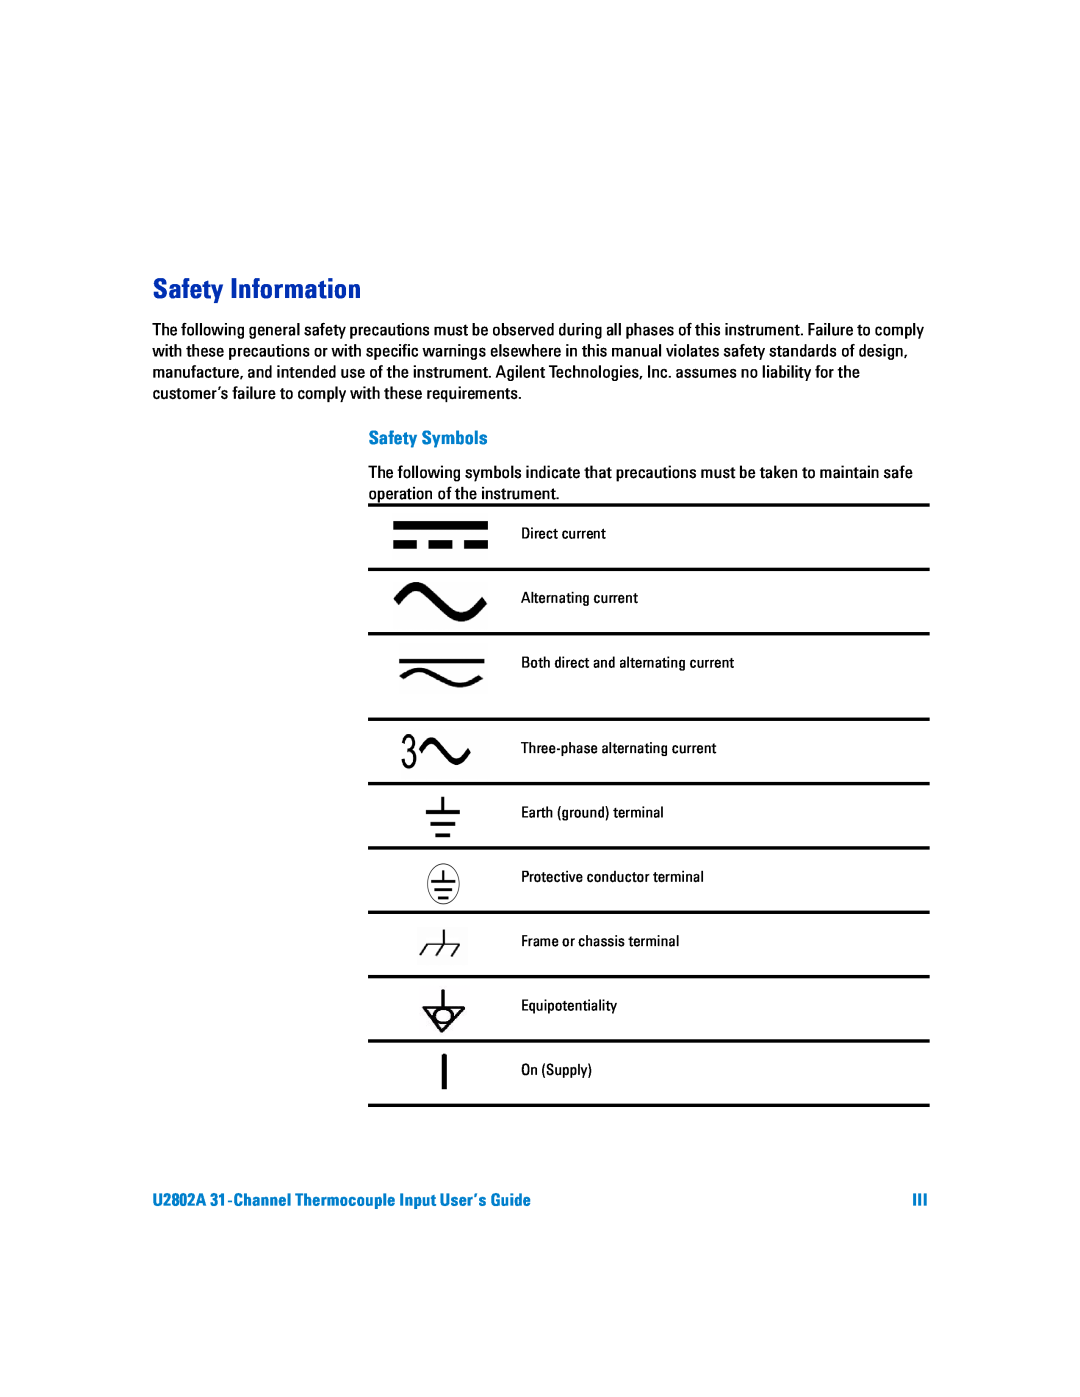 Agilent Technologies manual Safety Information, Safety Symbols, U2802A 31-ChannelThermocouple Input User’s Guide 